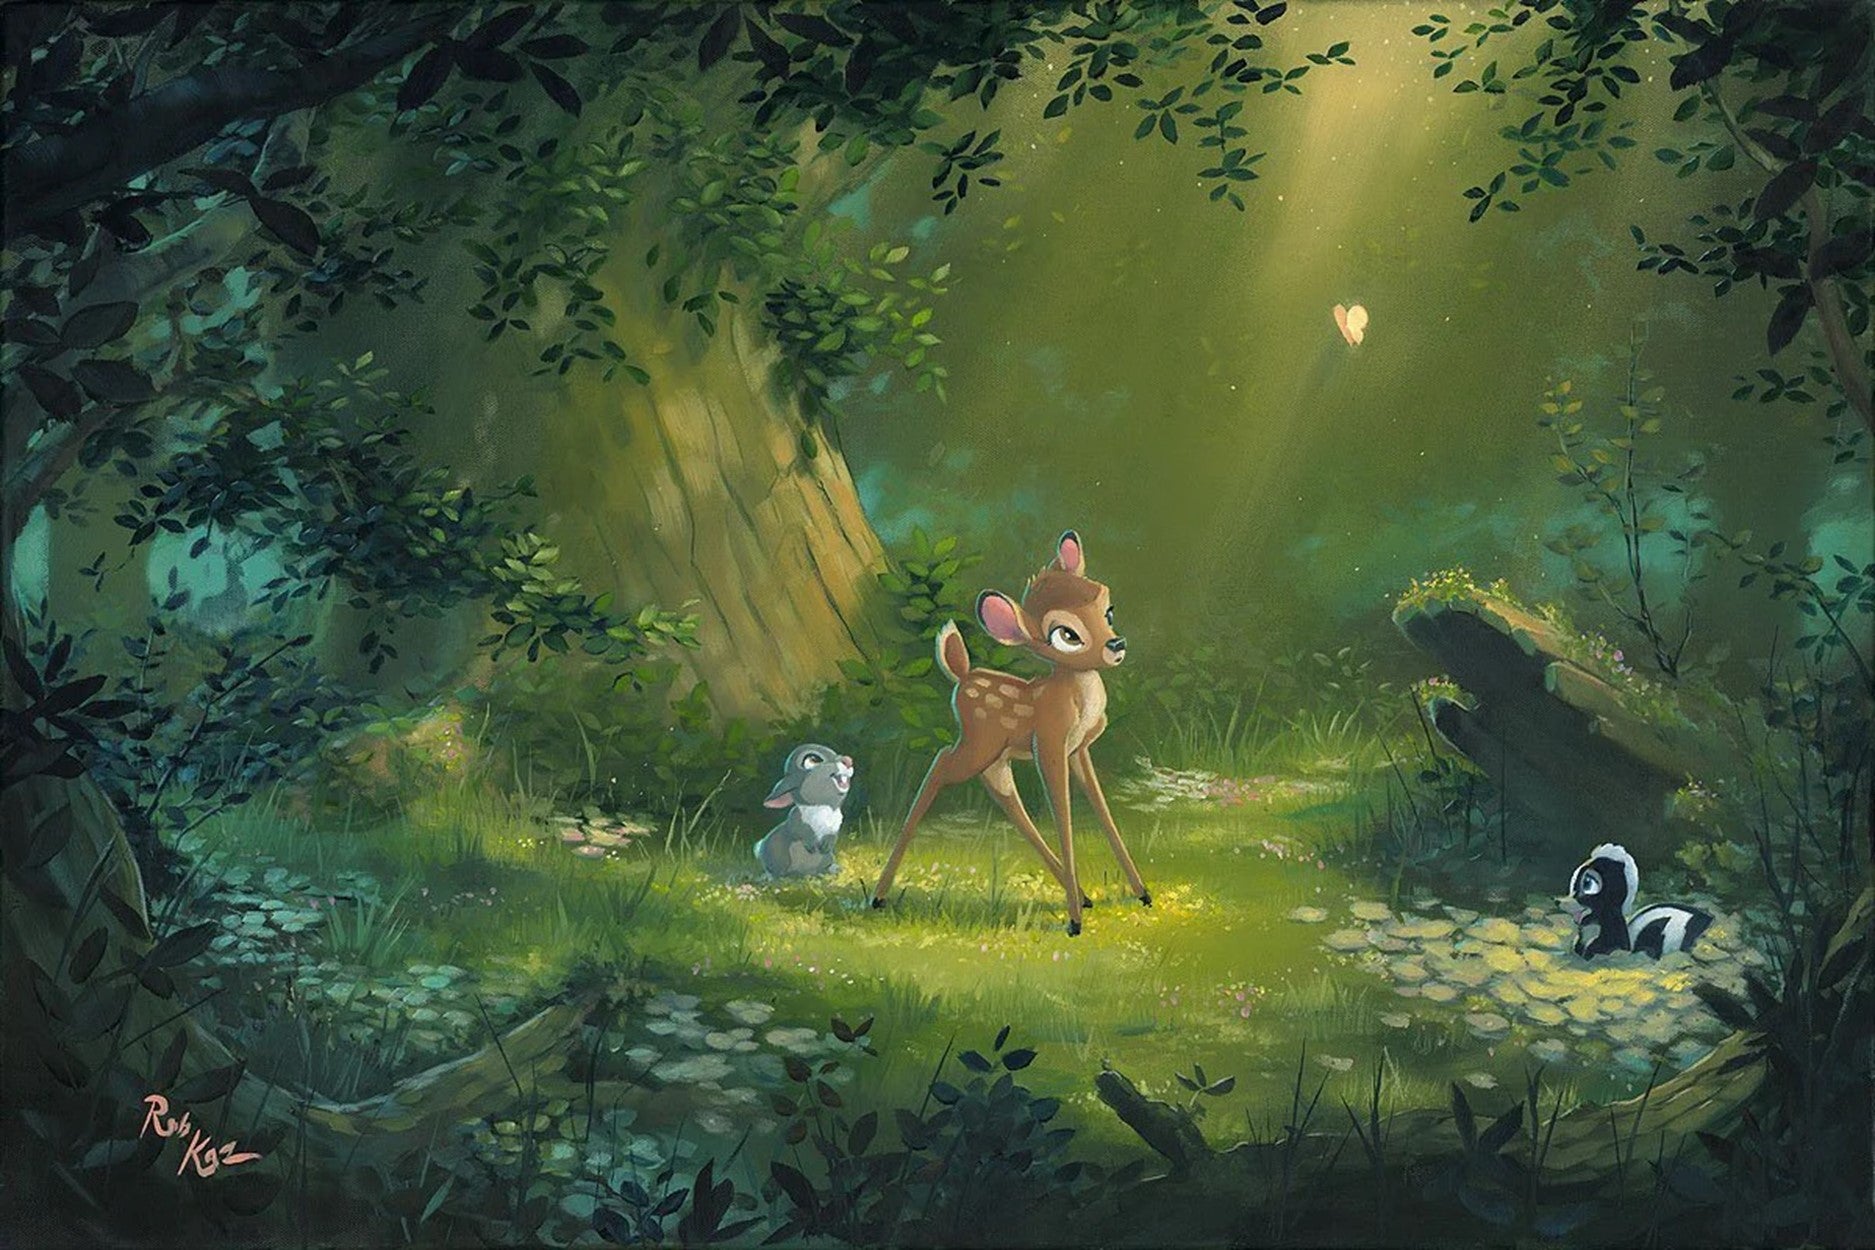 The Beauty of Life By Rob Kaz inspired by Bambi